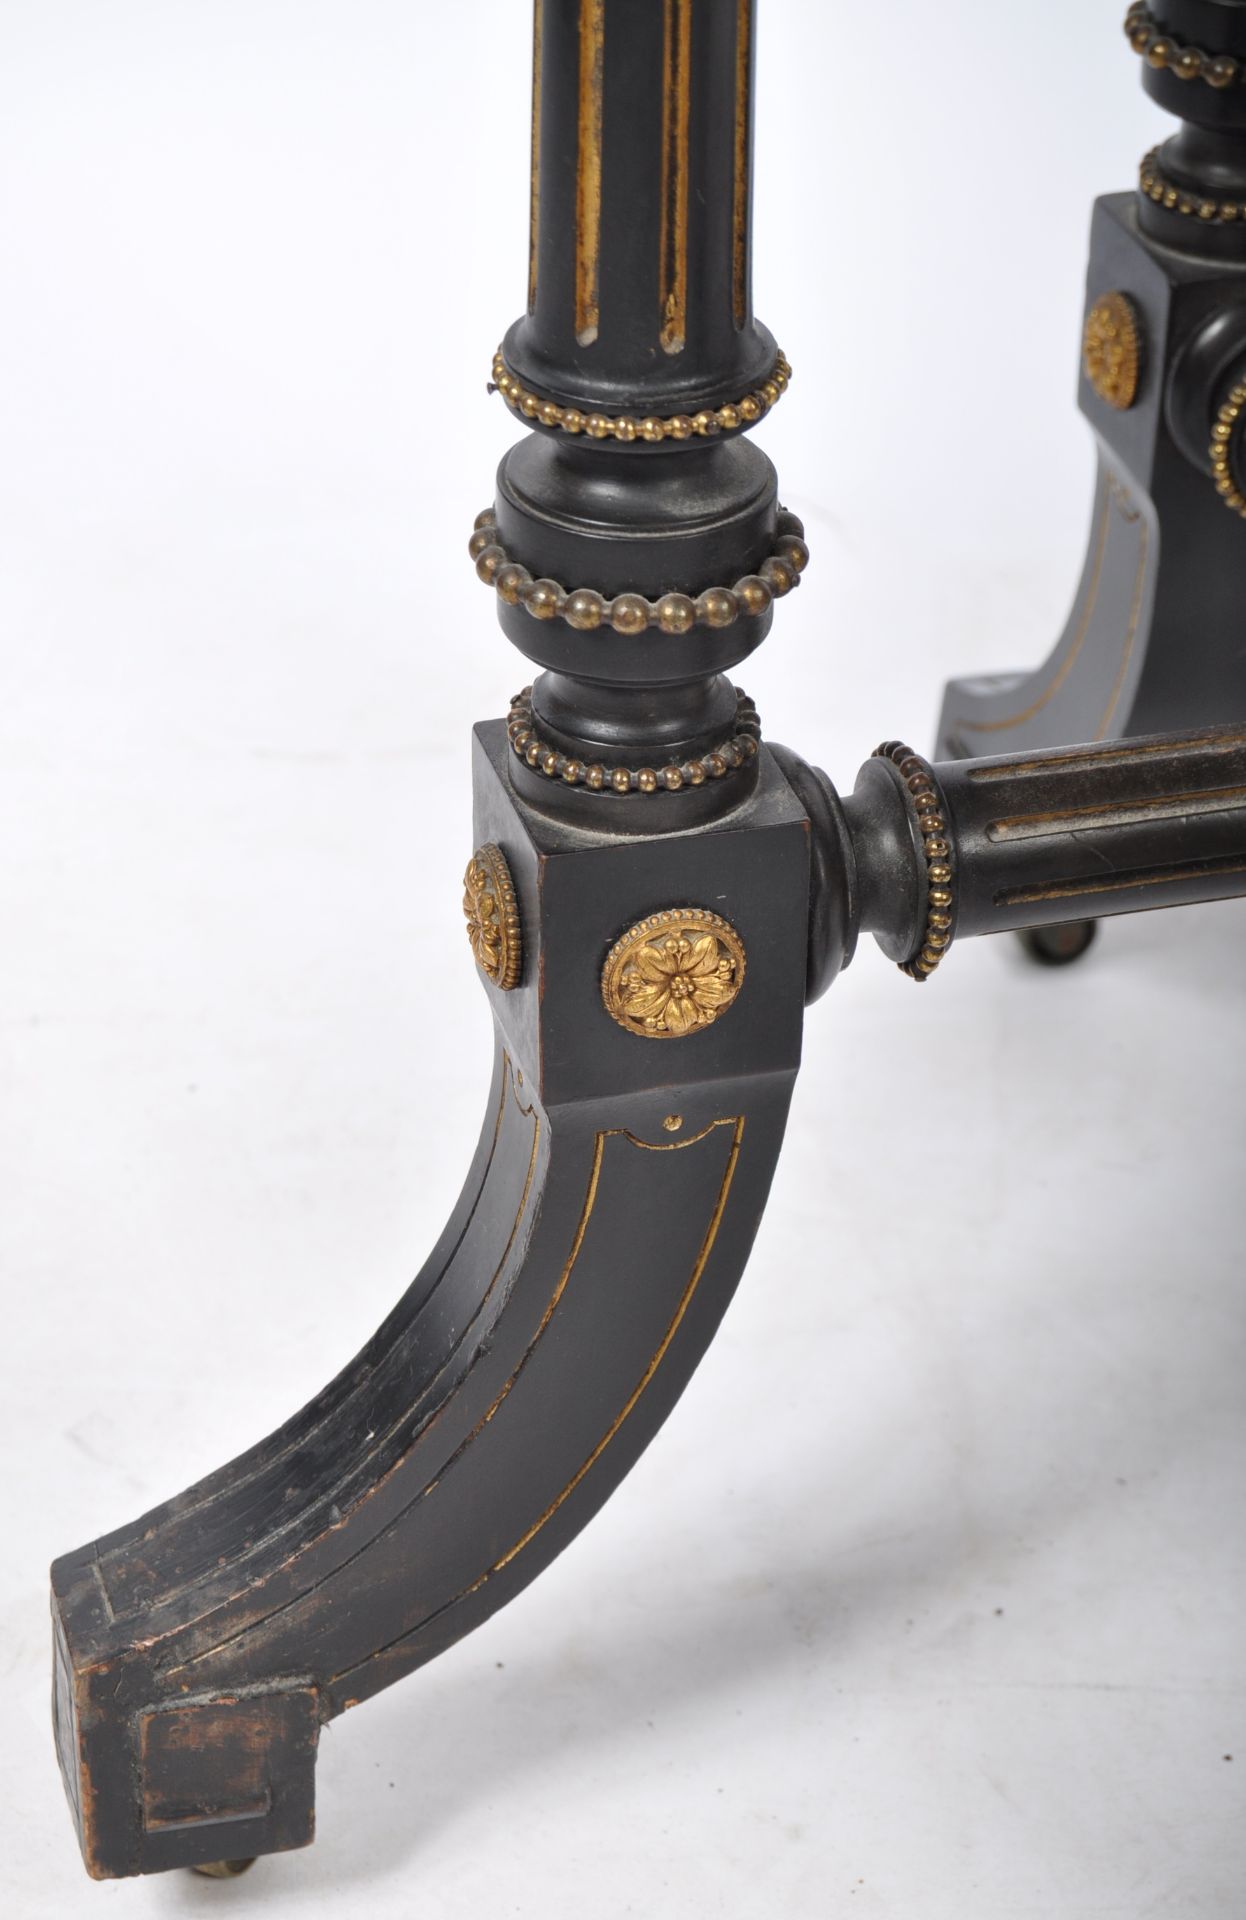 GILLOW & CO 19TH CENTURY EBONISED AND GILDED SIDE TABLE - Image 5 of 8